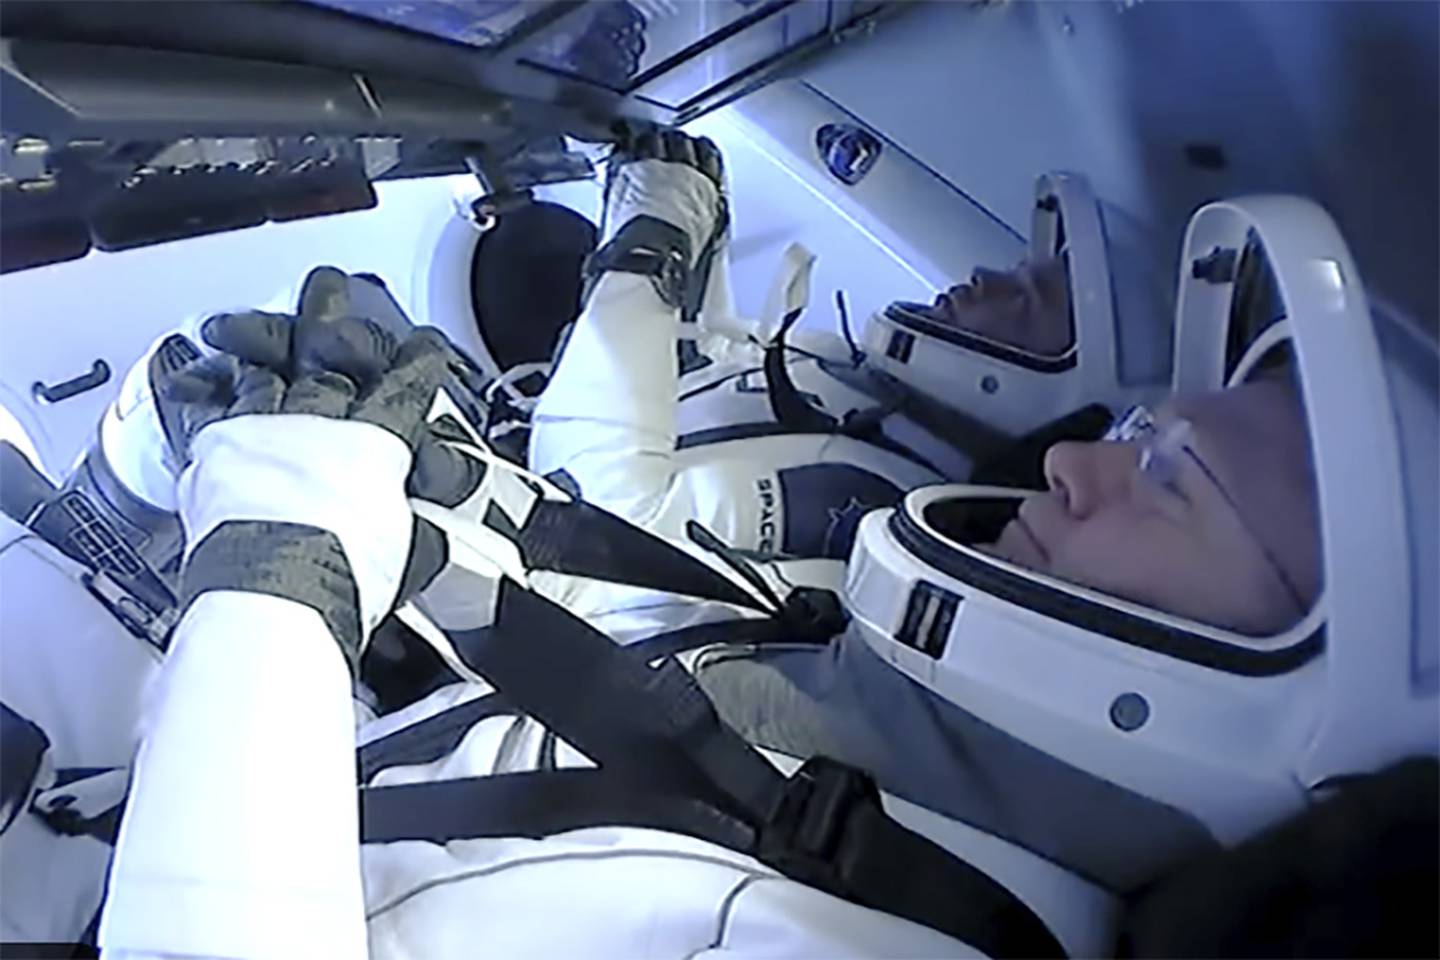 Astronauts Doug Hurley and Bob Behnken prepare to return to earth on a SpaceX capsule, Sunday, Aug. 2, 2020.